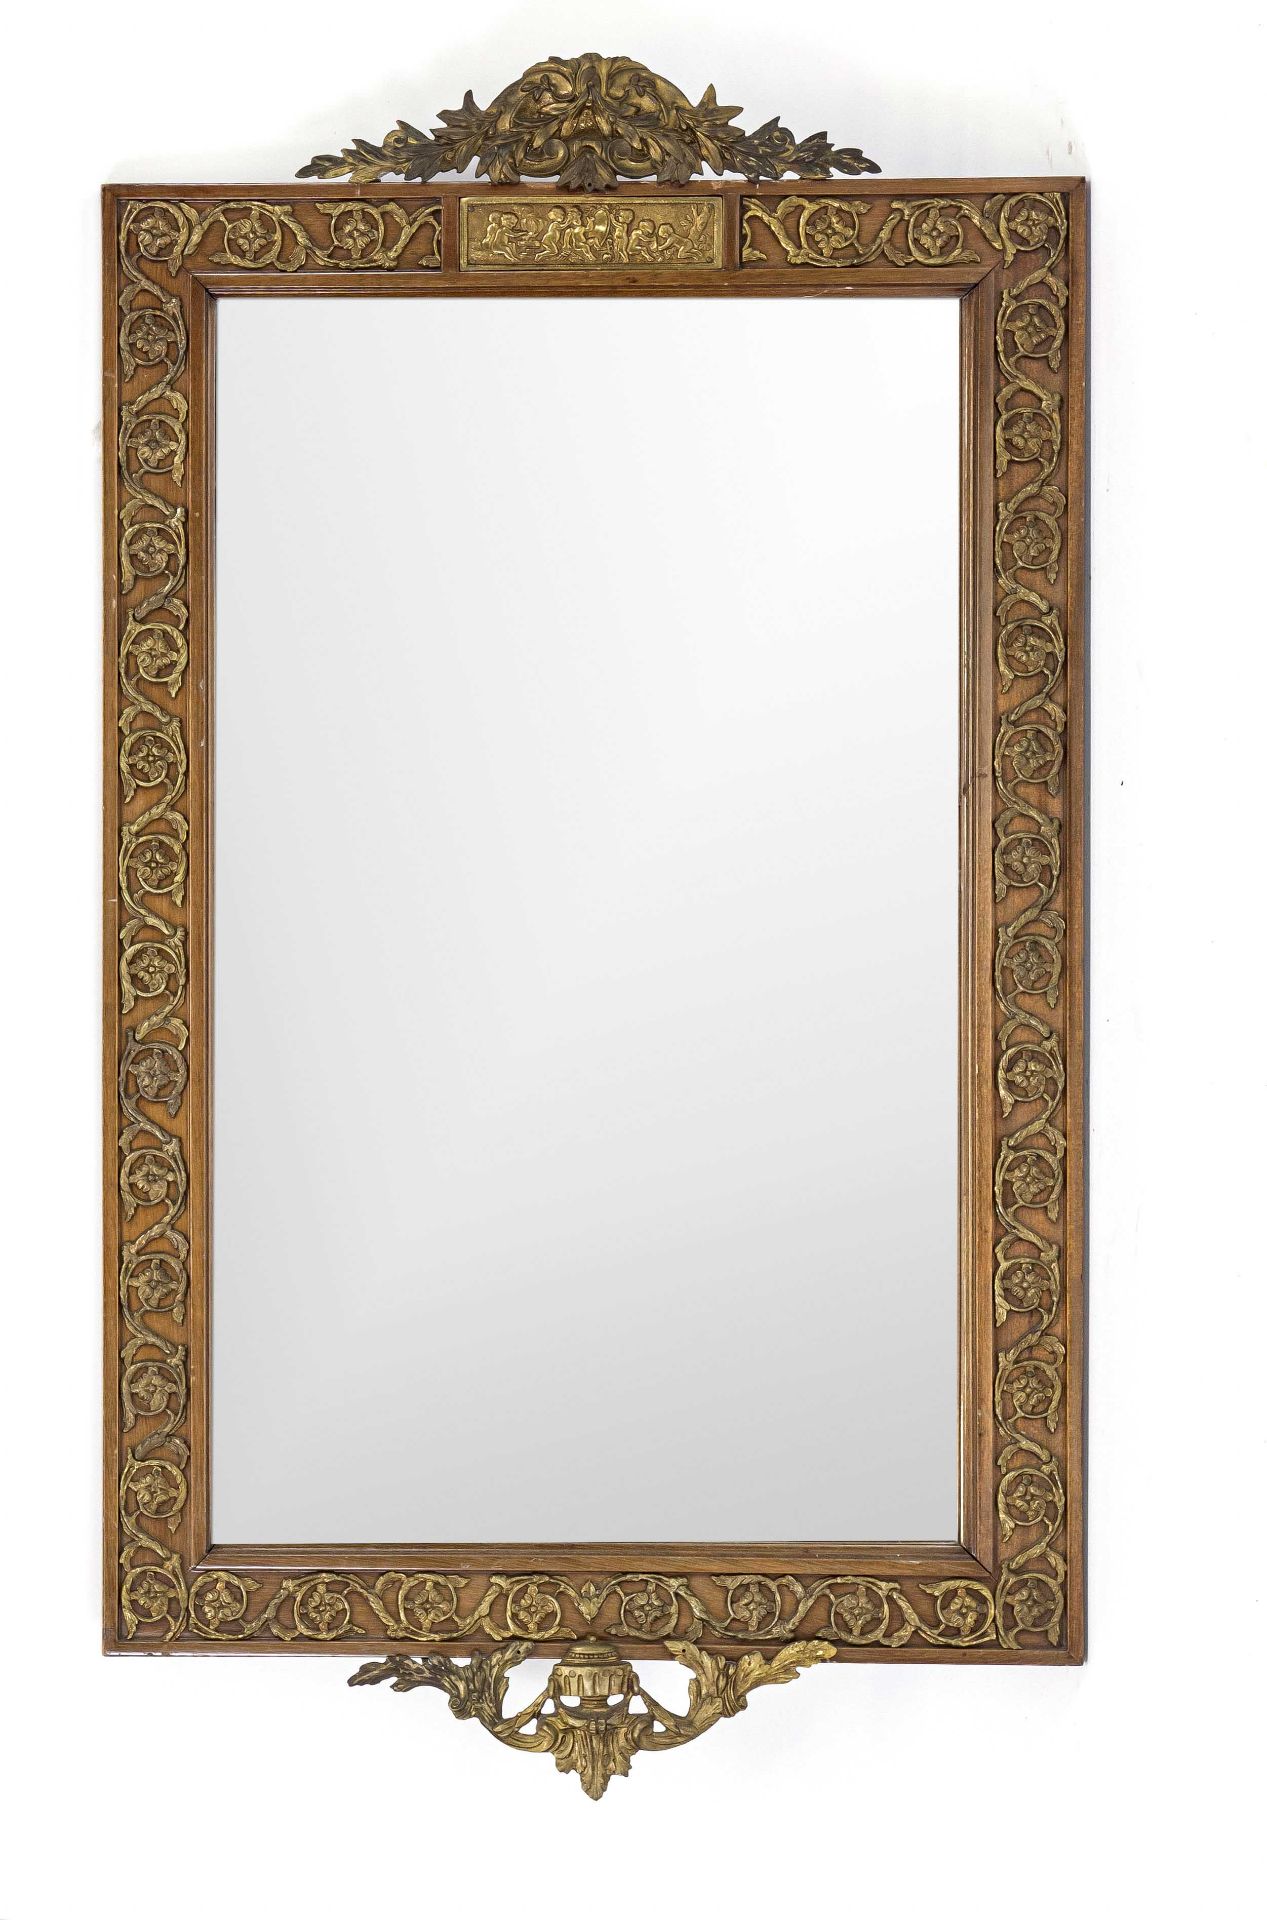 Wall mirror in neoclassical style, 20th century, wooden frame with bronze applications, 102 x 58 cm